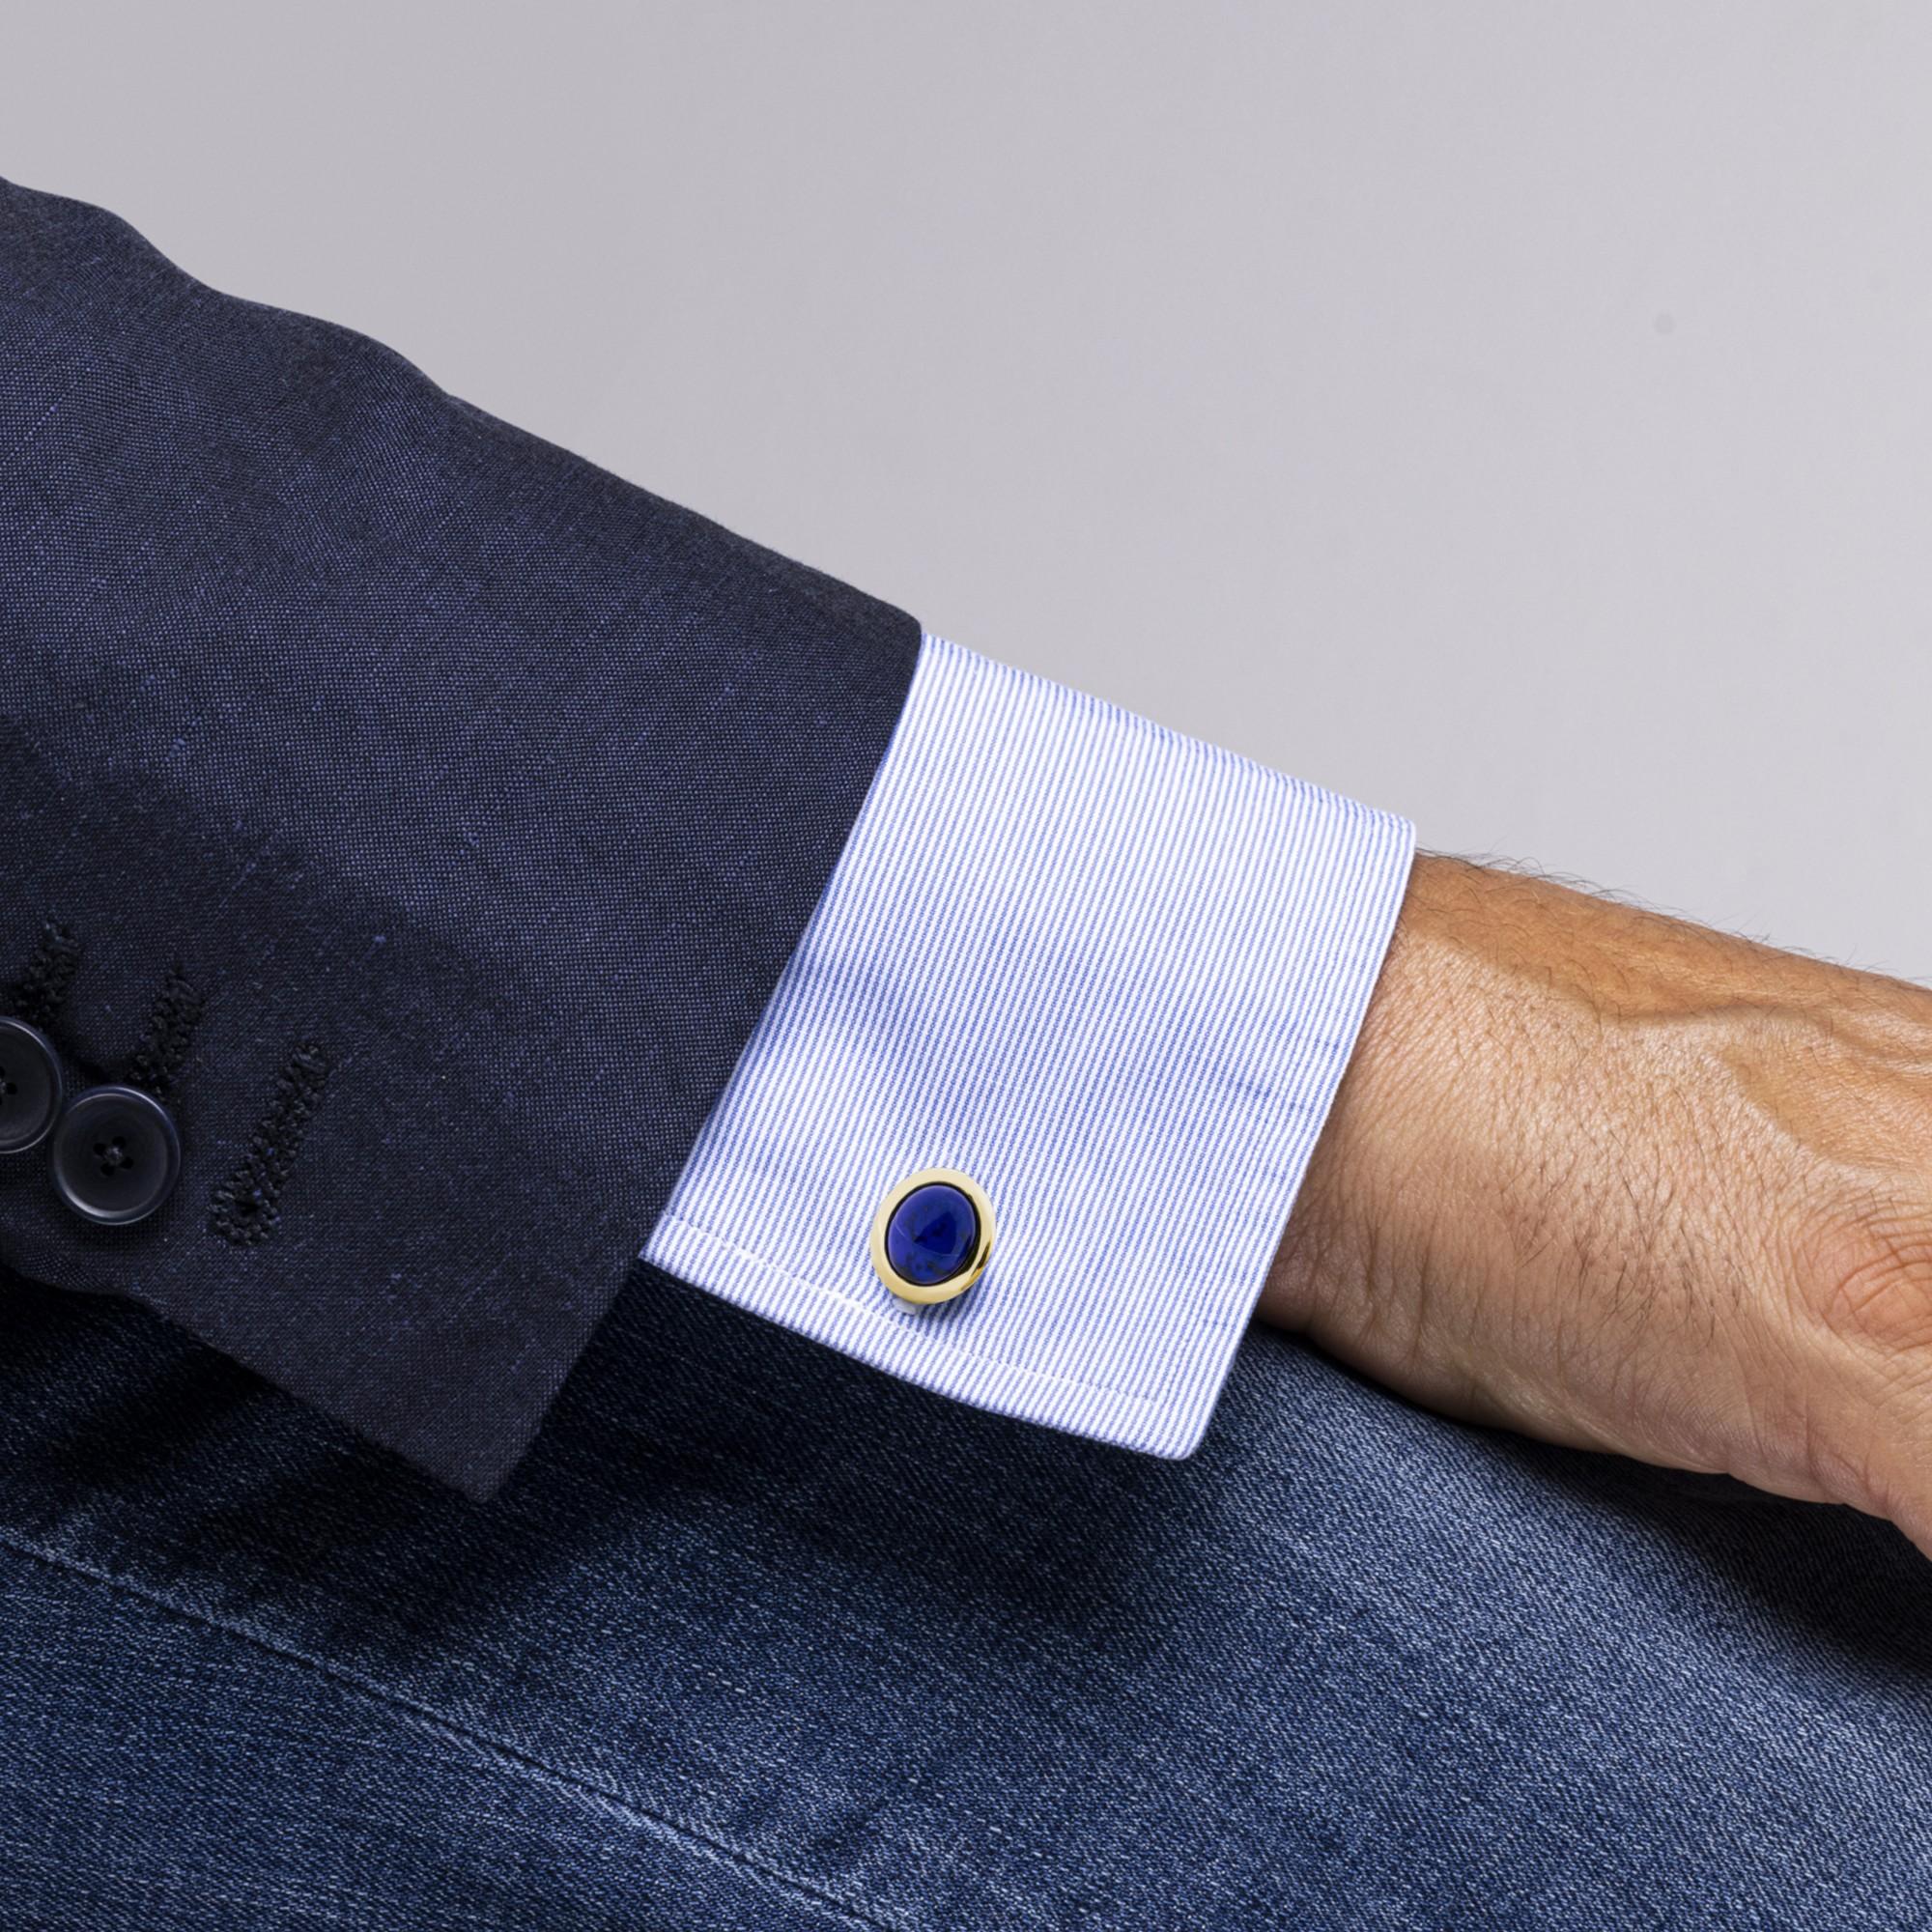 Alex Jona design collection, hand crafted in Italy, lapis lazuli oval cufflinks mounted in 18 karat yellow gold.

Alex Jona cufflinks stand out, not only for their special design and for the excellent quality, but also for the careful attention